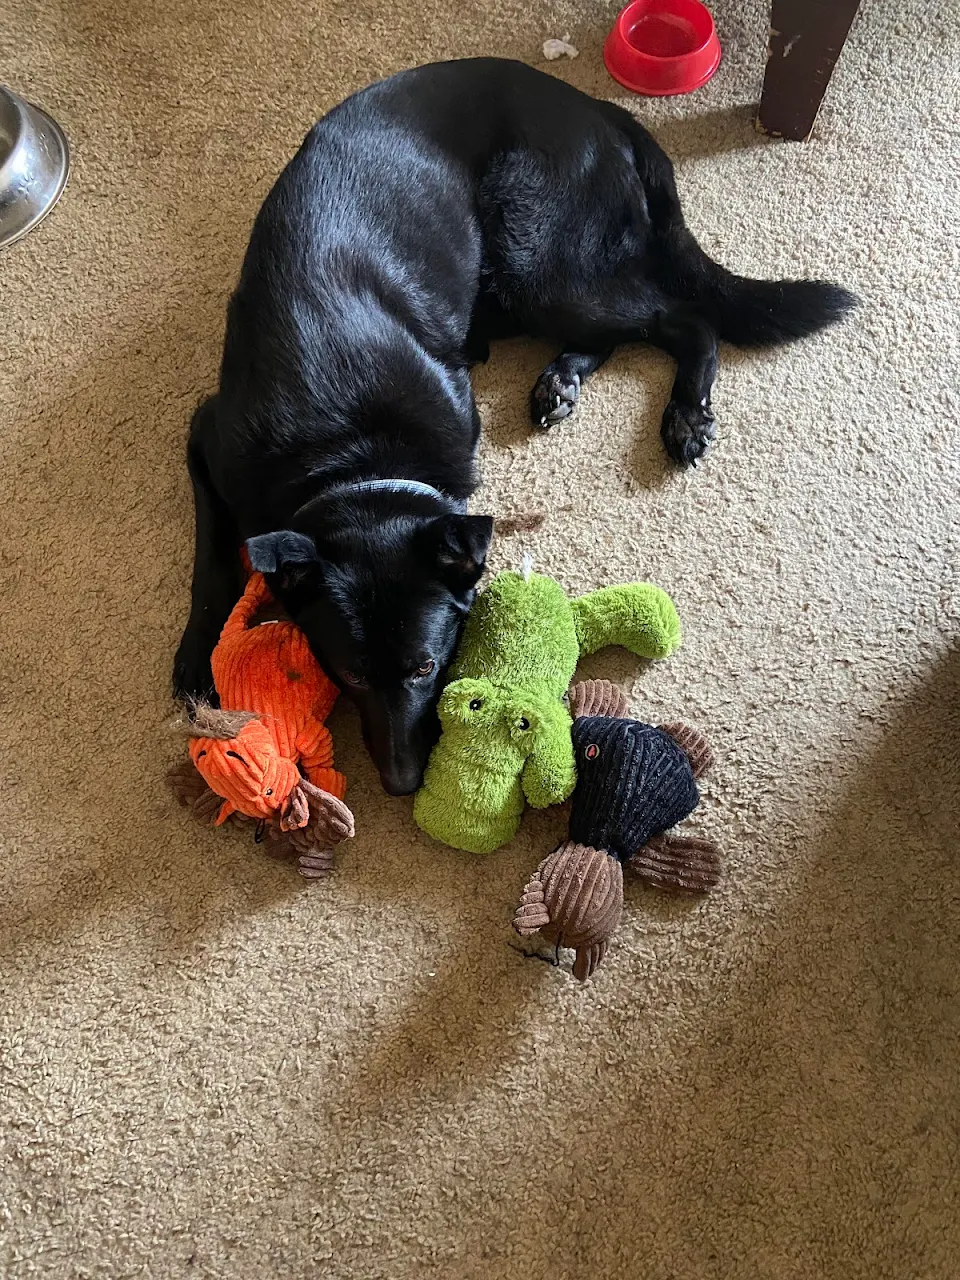 Brought Jackson a new toy today and after we gave it to him, he rounded up his others